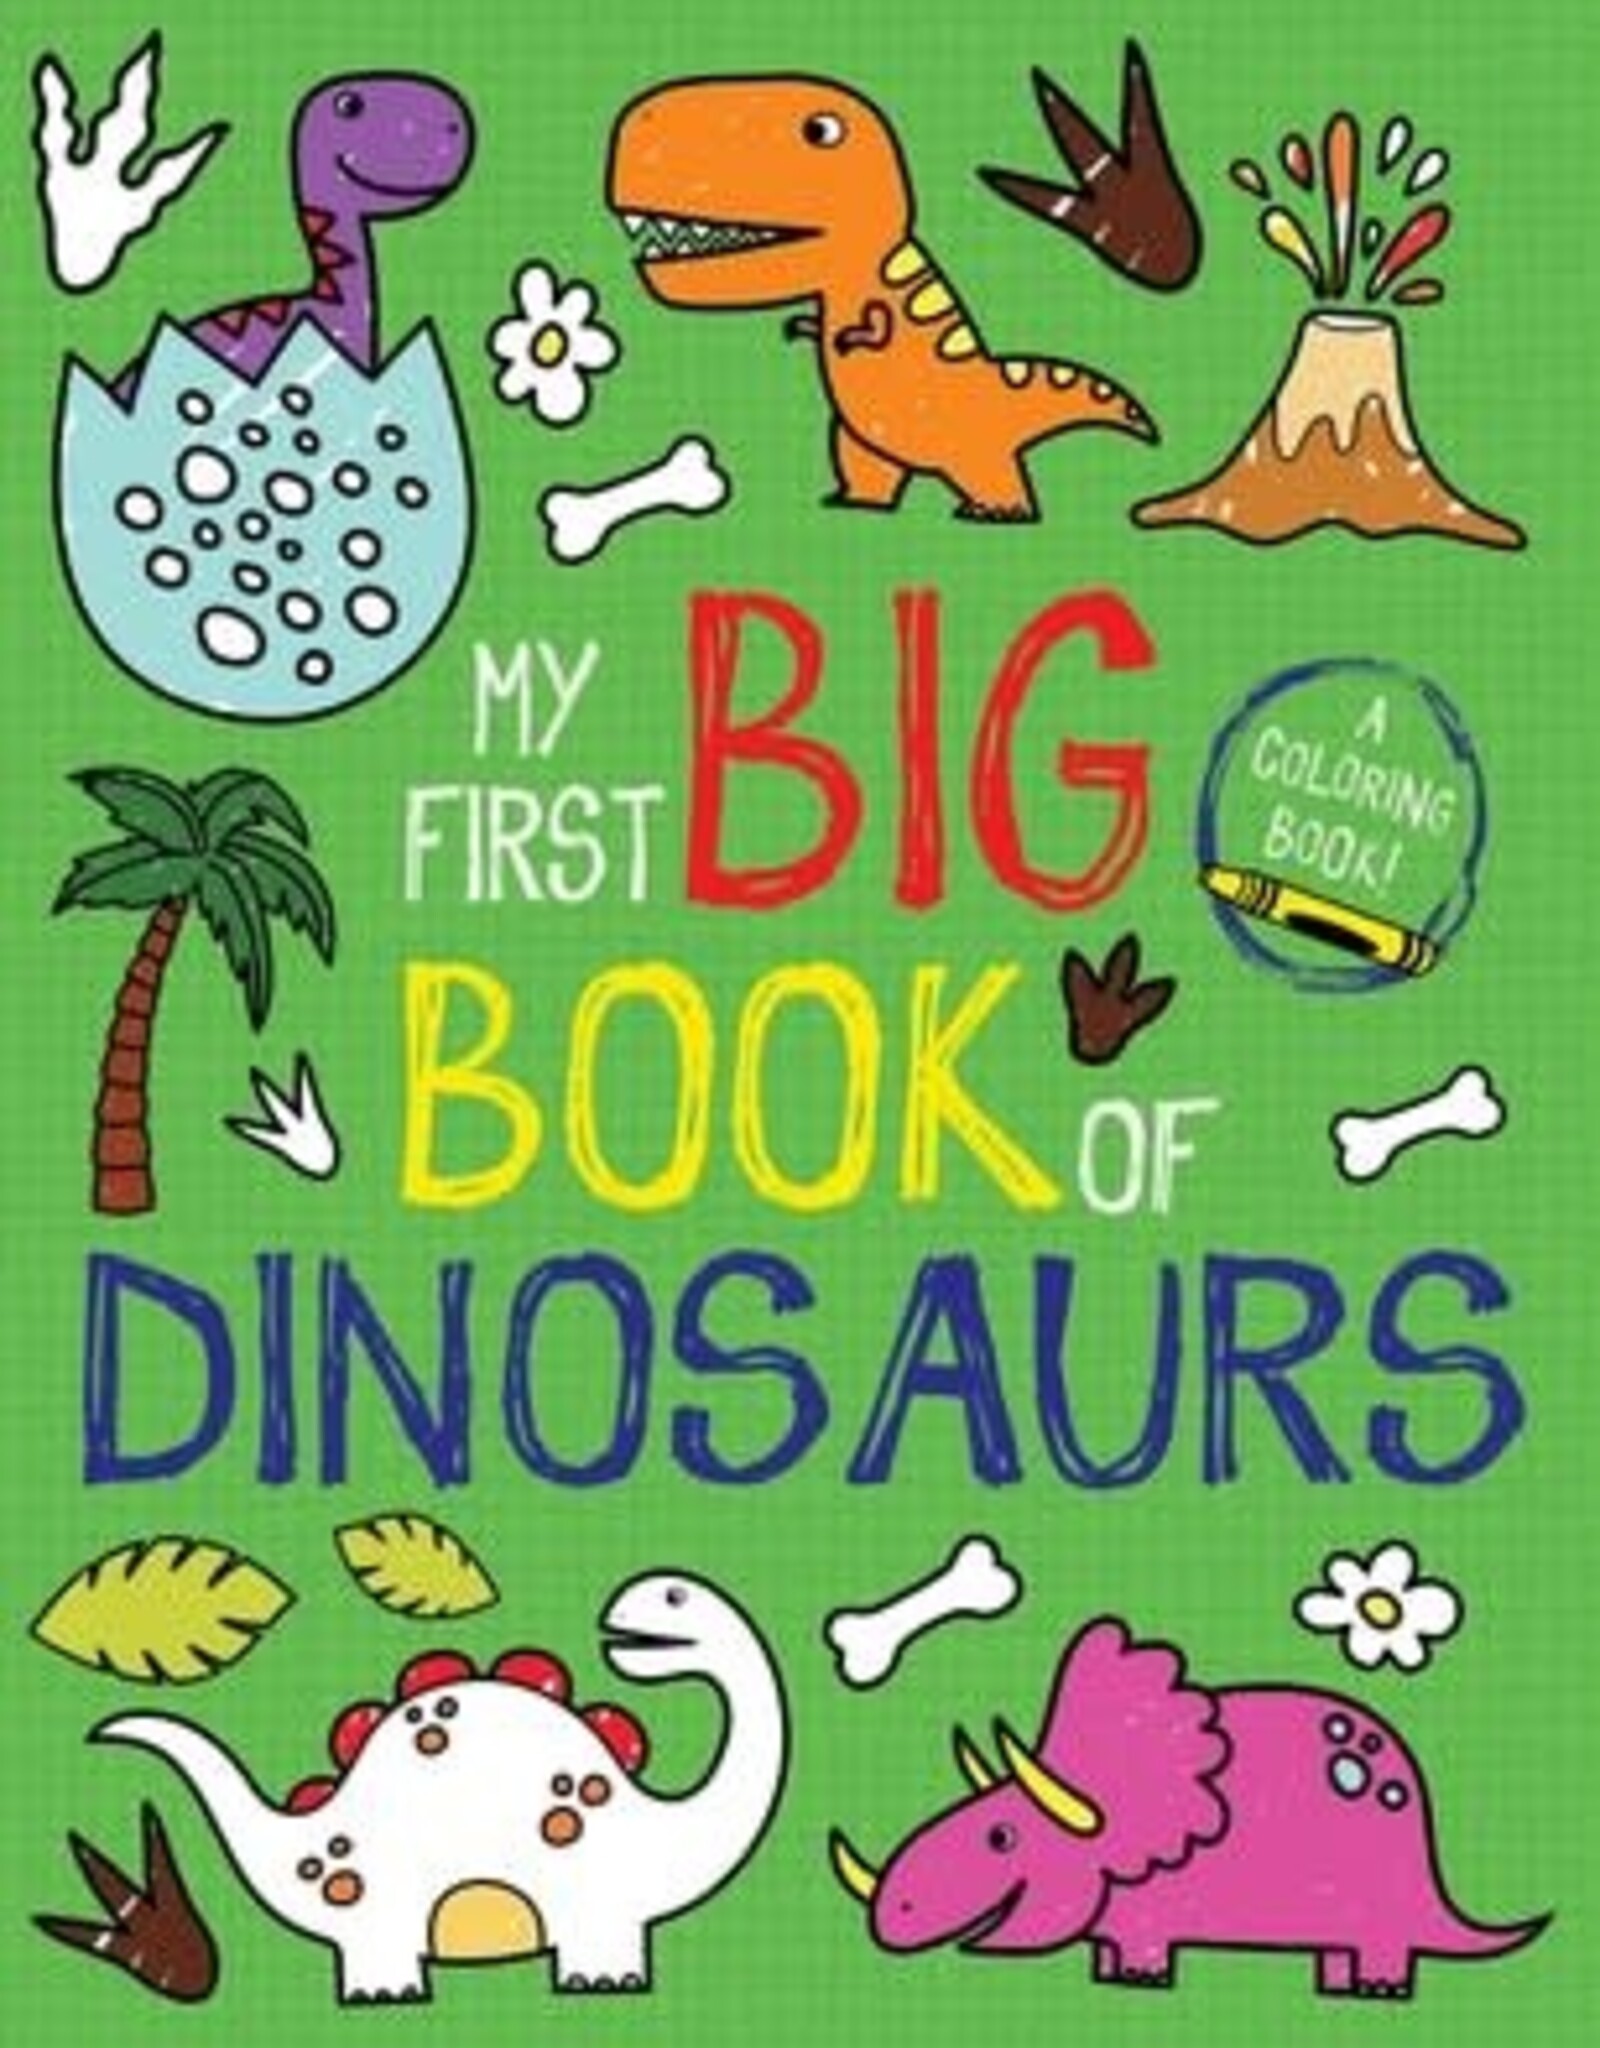 Simon and Schuster My First Big Book of Dinosaurs